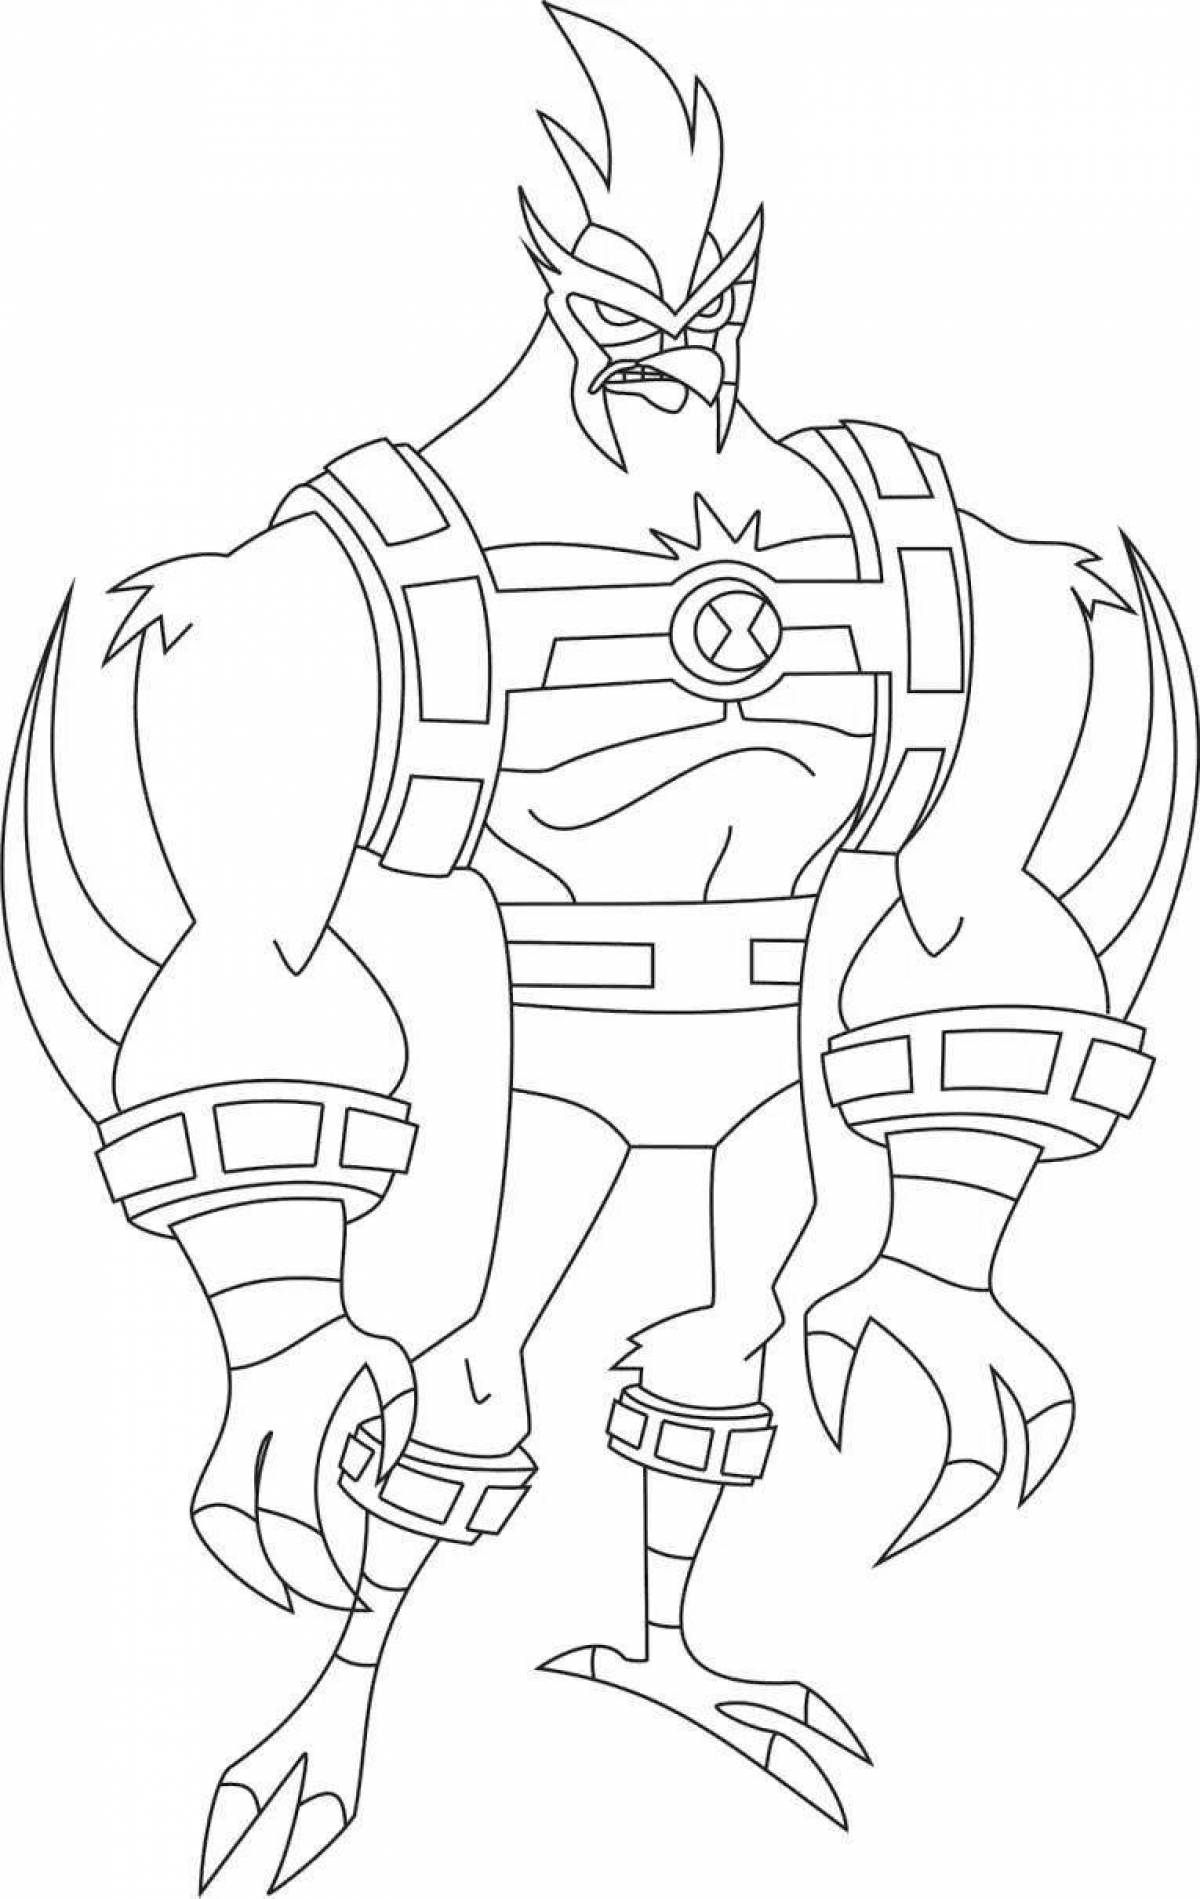 Cujitso playful coloring page